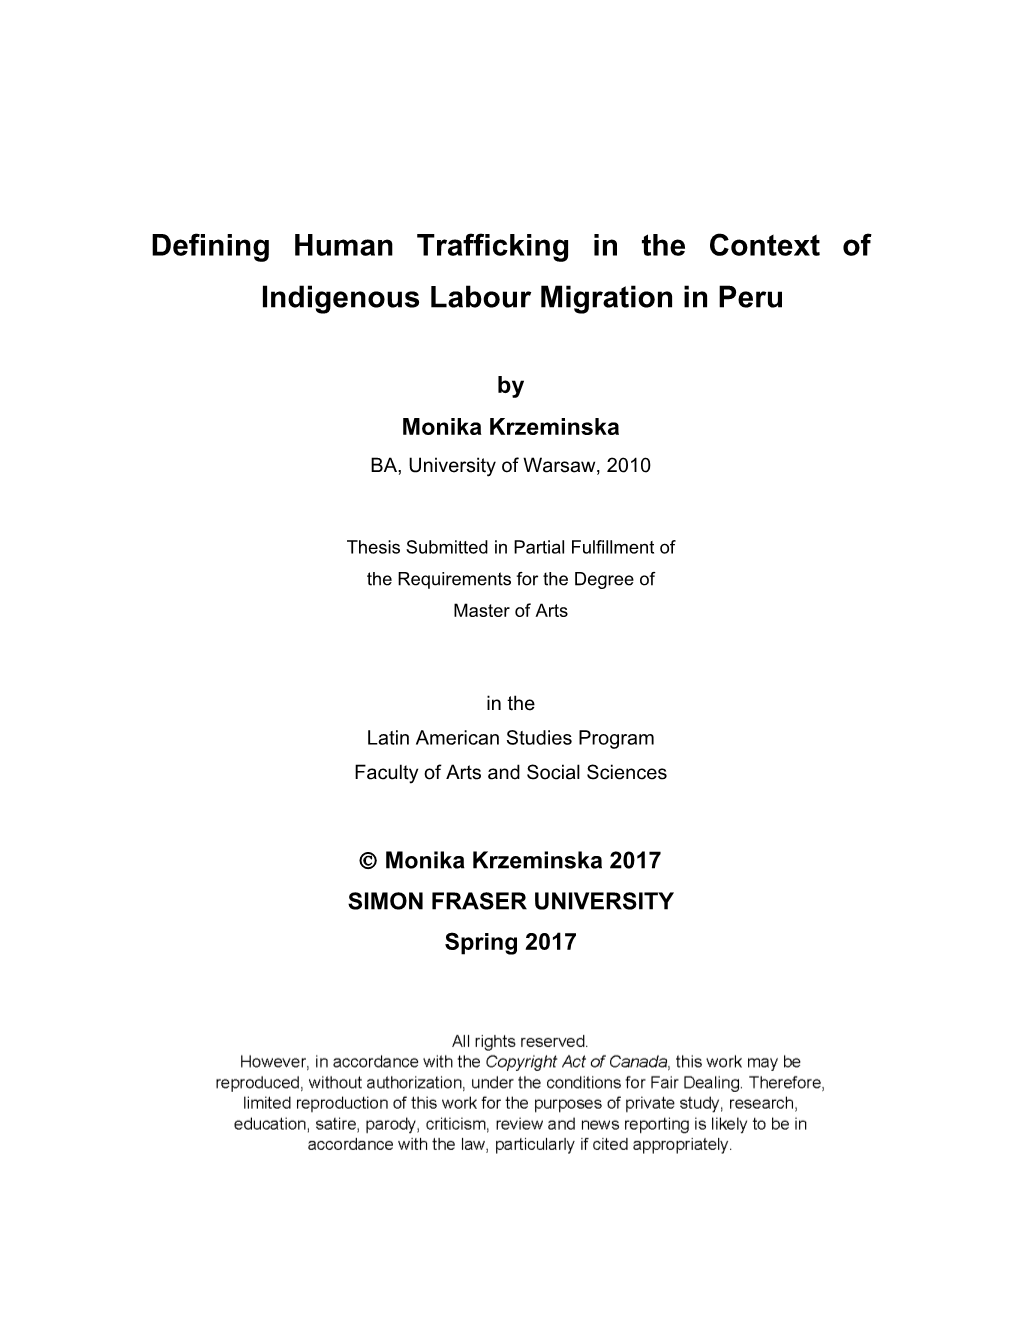 Defining Human Trafficking in the Context of Indigenous Labour Migration in Peru